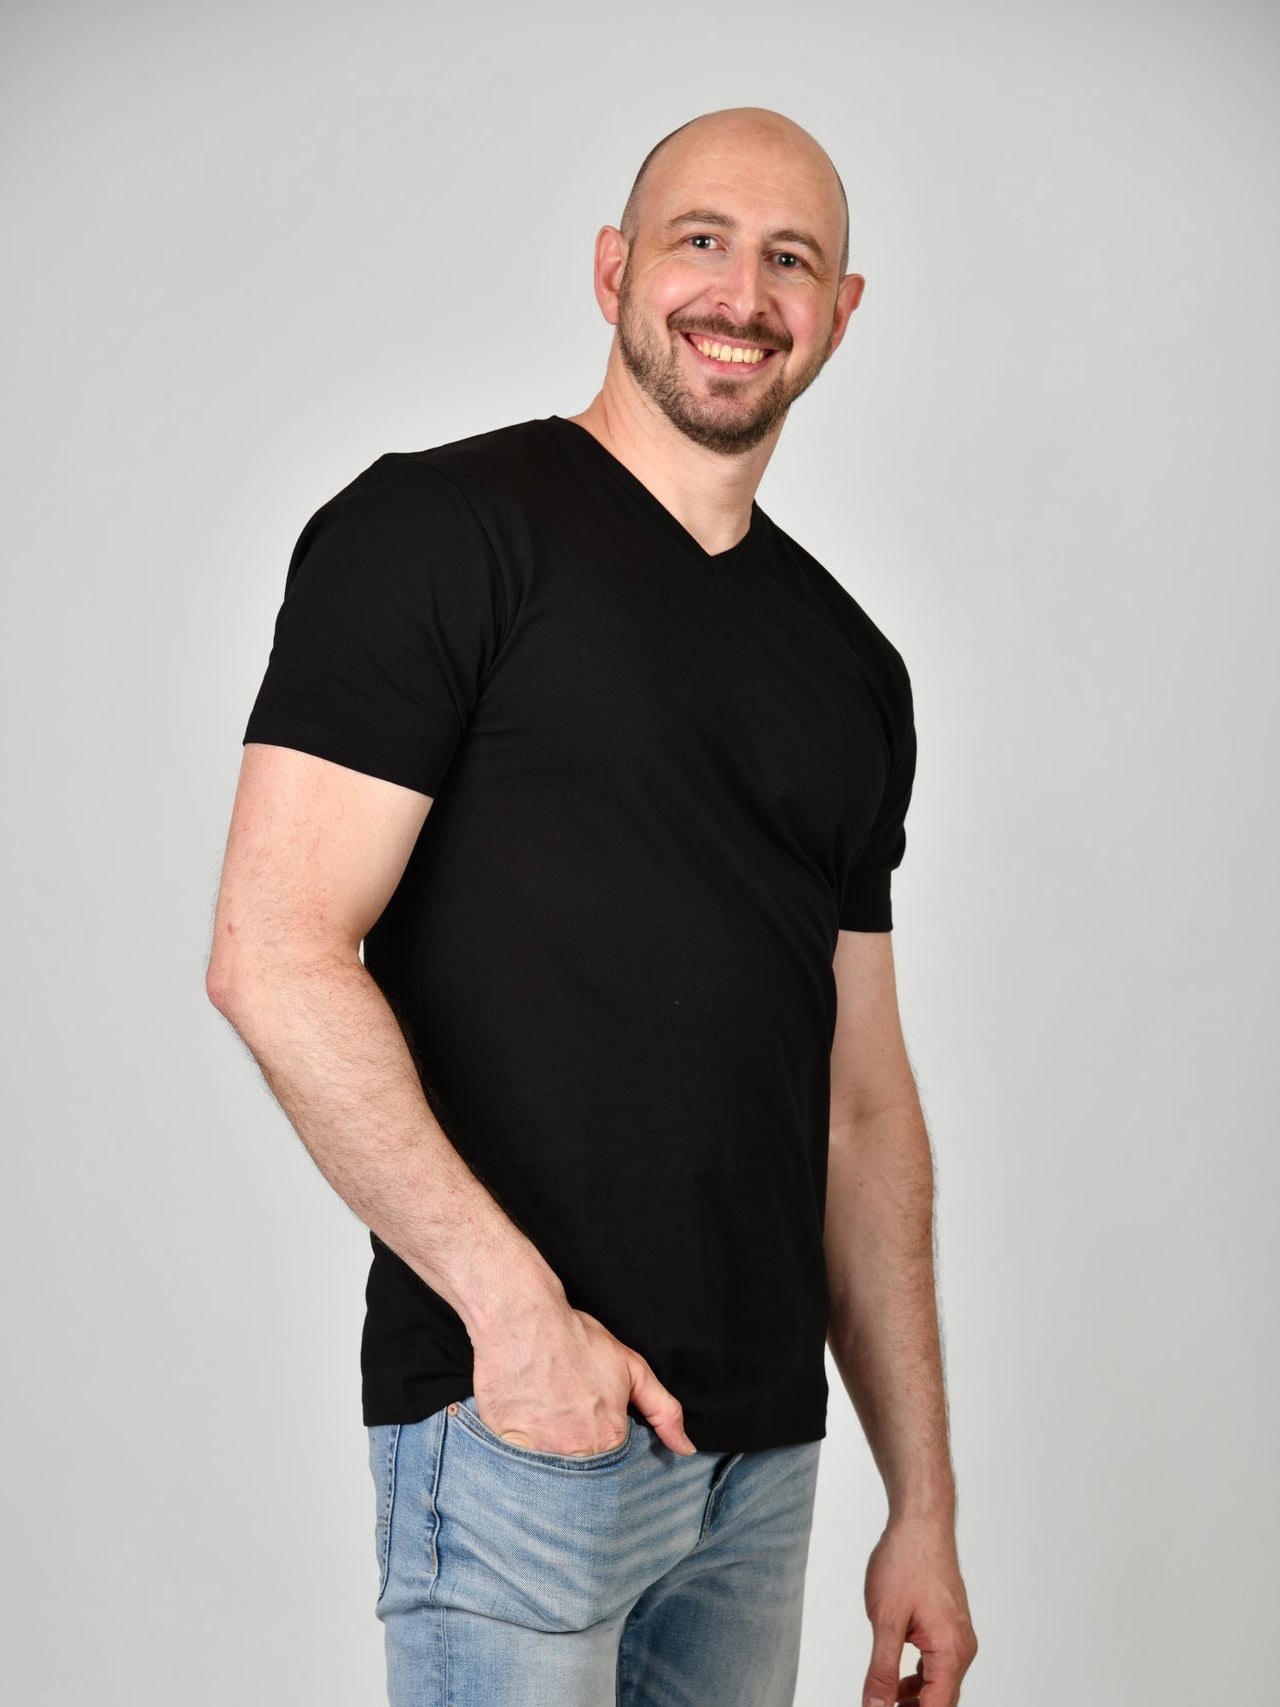 A tall and slim guy smiling in the studio, one hand in pocket and wearing a black XL tall slim v-neck t-shirt.